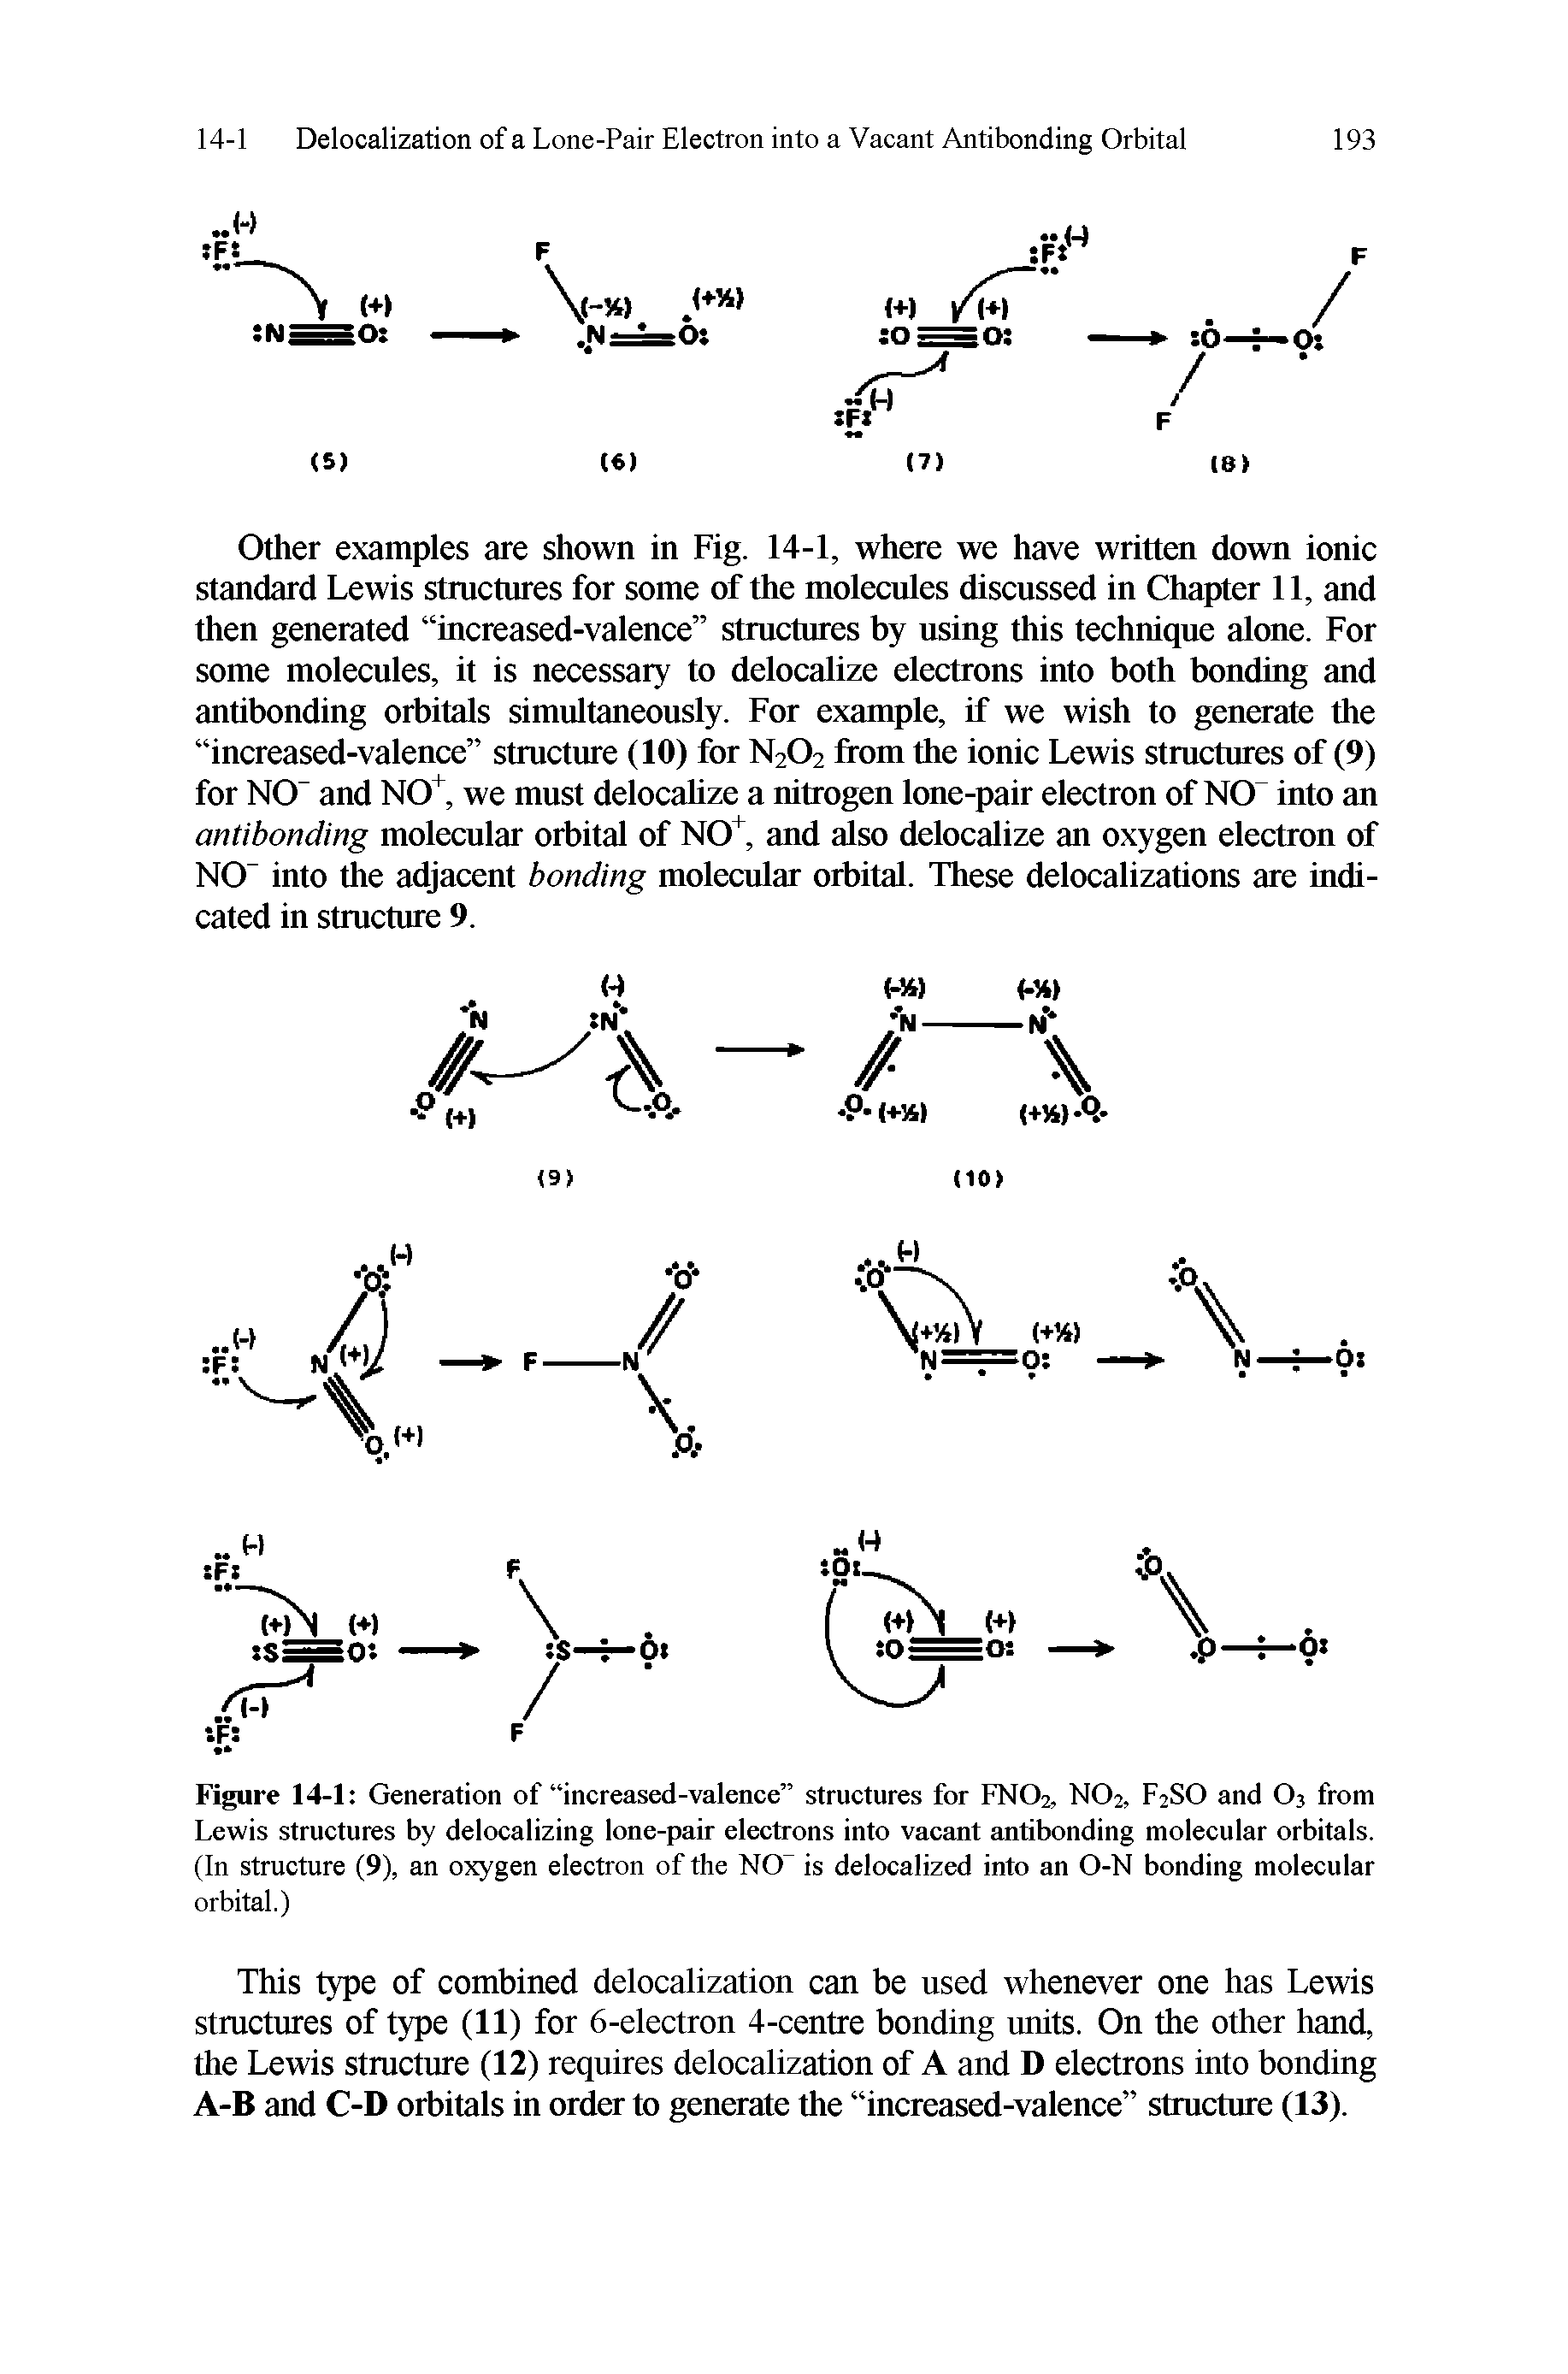 Figure 14-1 Generation of increased-valence structures for FNO2, NO2, F2SO and O3 from Lewis structures by delocalizing lone-pair electrons into vacant antibonding molecular orbitals. (In structure (9), an oxygen electron of the NO is delocalized into an O-N bonding molecular orbital.)...